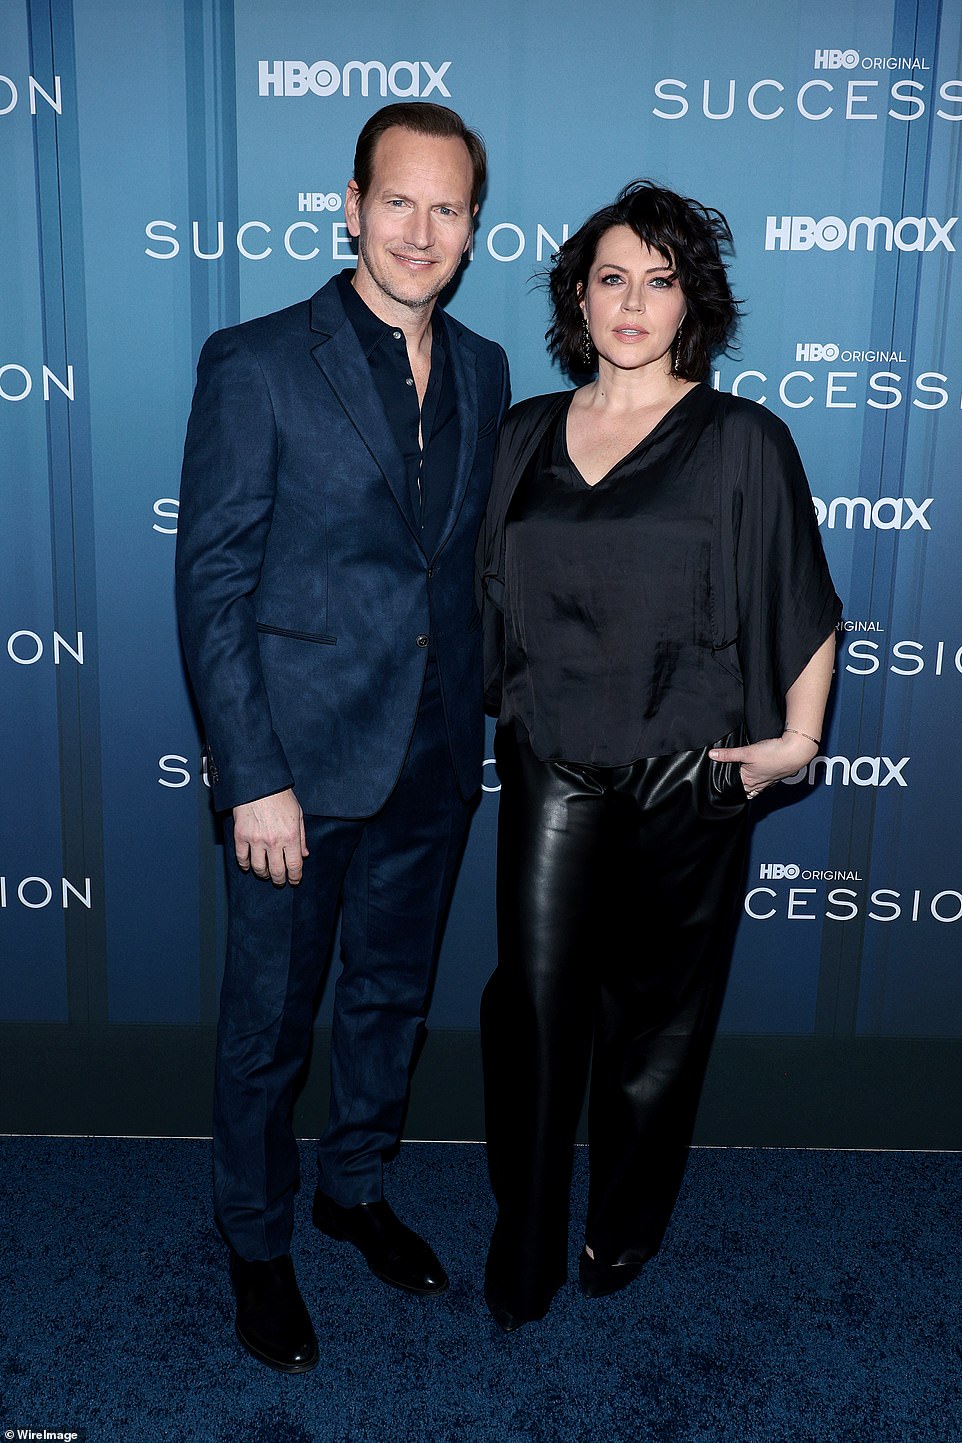 Night out! Patrick Wilson looked smart in a blue suit as he posed with his wife Dagmara Dominczyk